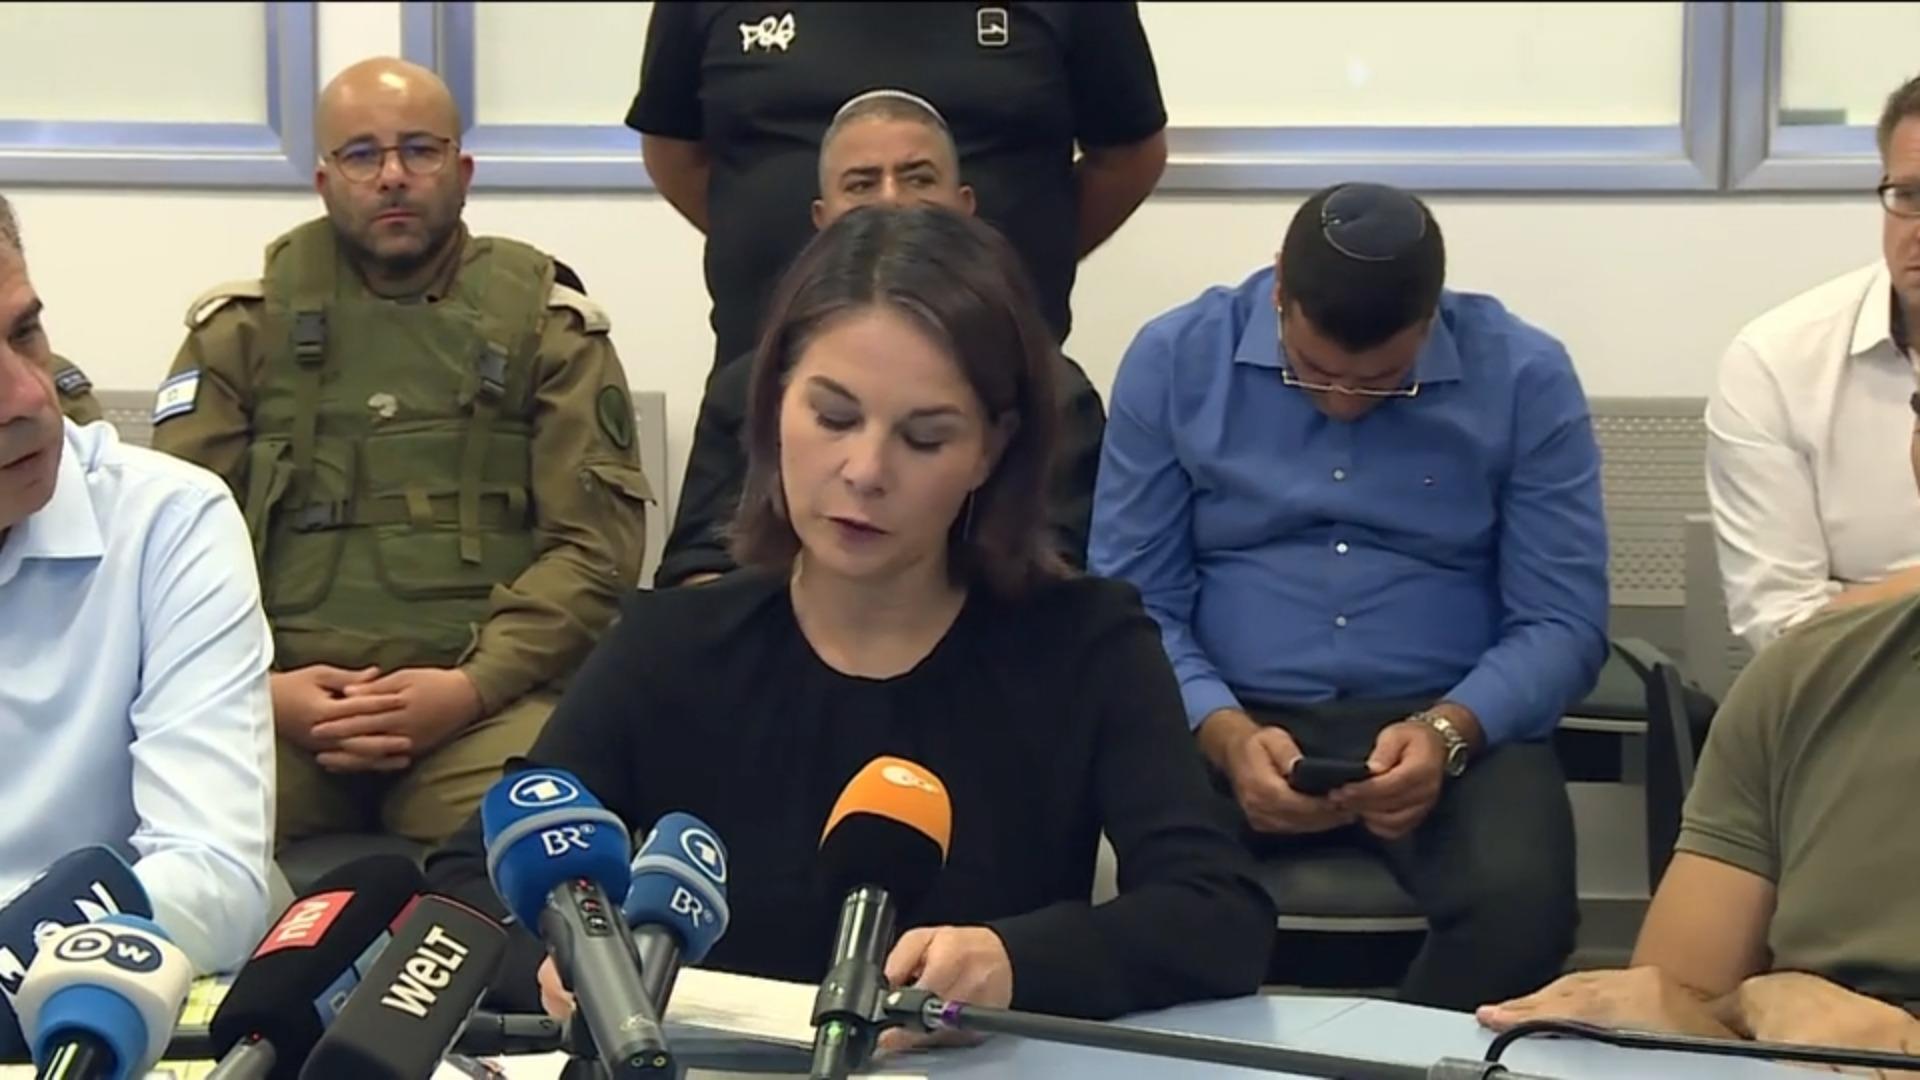 "Everyone is sitting here like father and mother" Annalena Baerbach in Israel